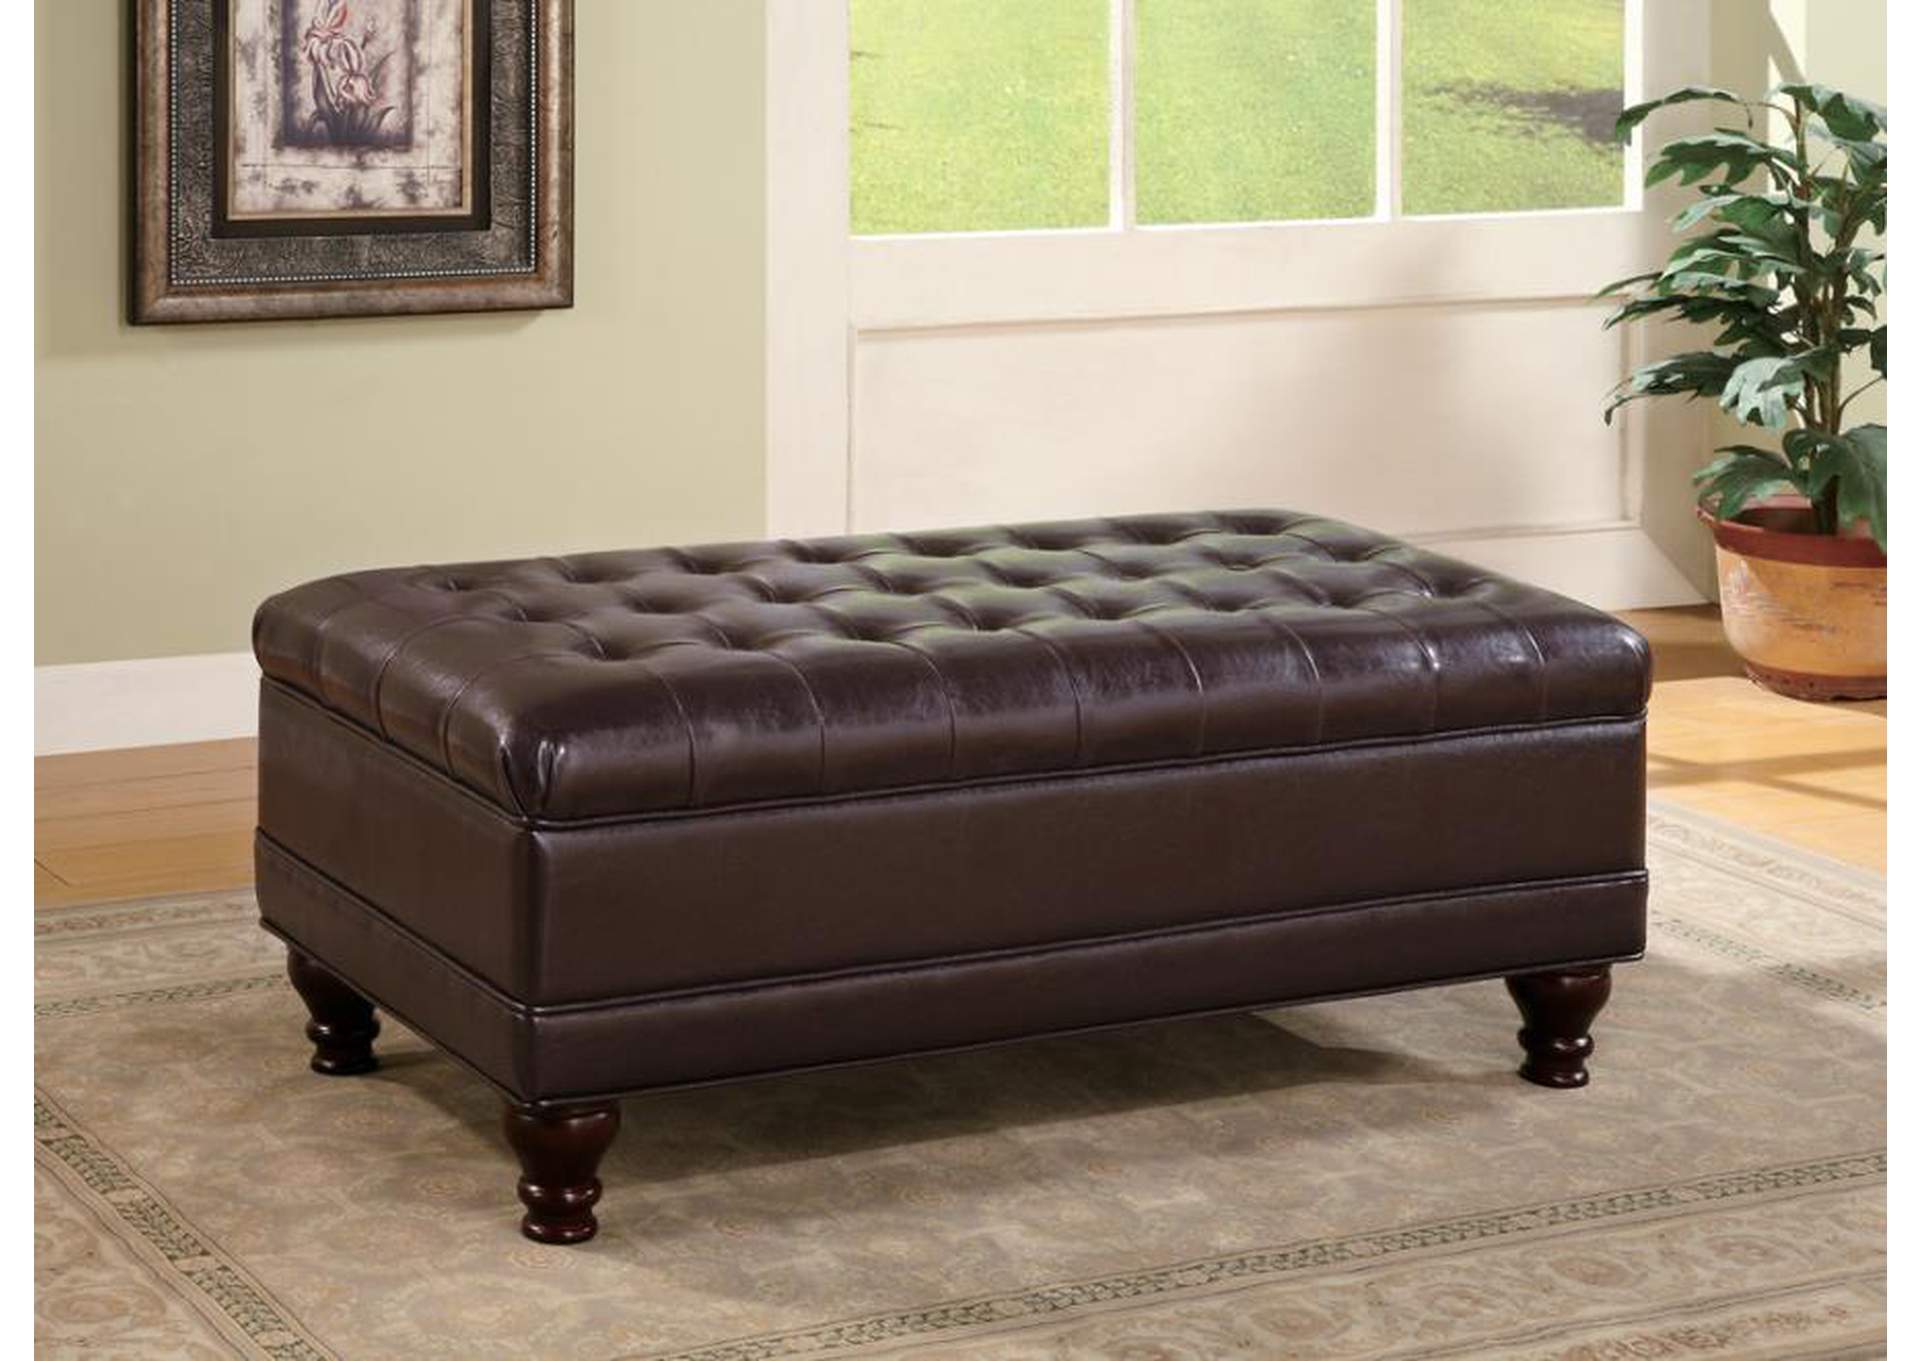 Bradley Tufted Storage Ottoman With Turned Legs Brown,Coaster Furniture